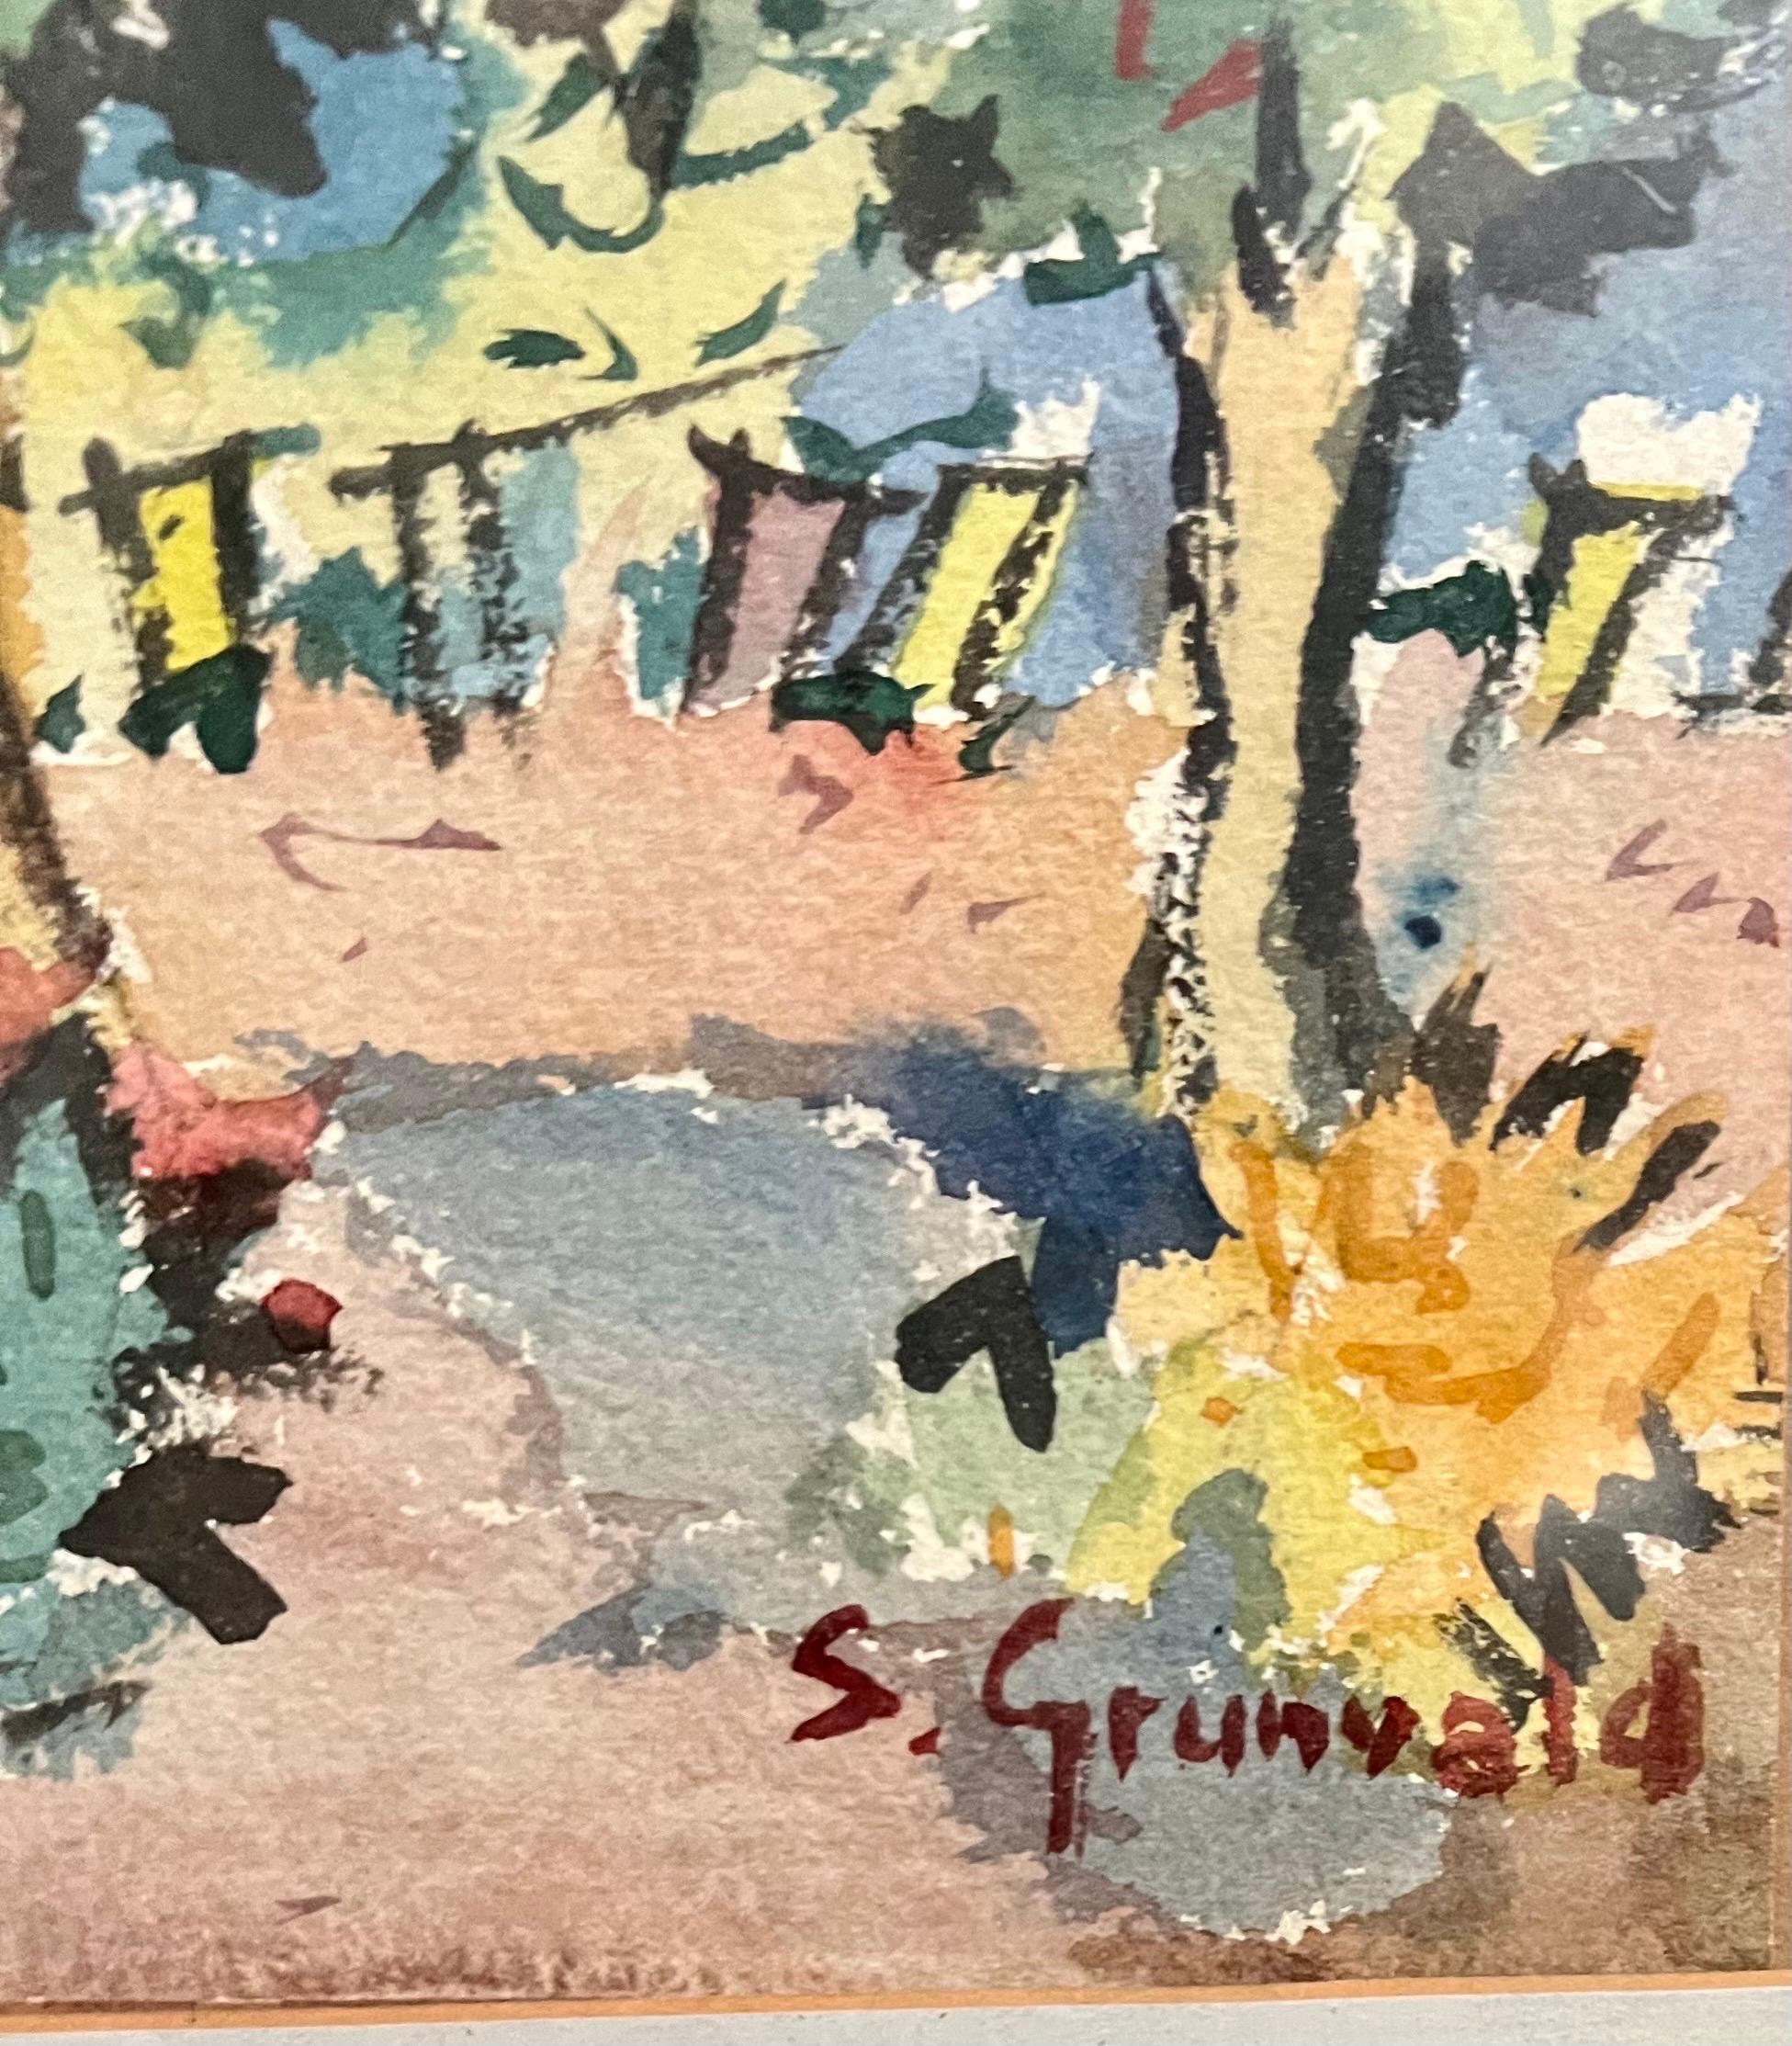 Bungalow (fauvist painting of New York scene) 1940's.
image is  10X 11.5 inches. Hand signed lower right
Country Scene

Samuel Grunvald was a Hungarian born American WPA artist known for abstract, landscape and seascape paintings.
Arrived in the USA